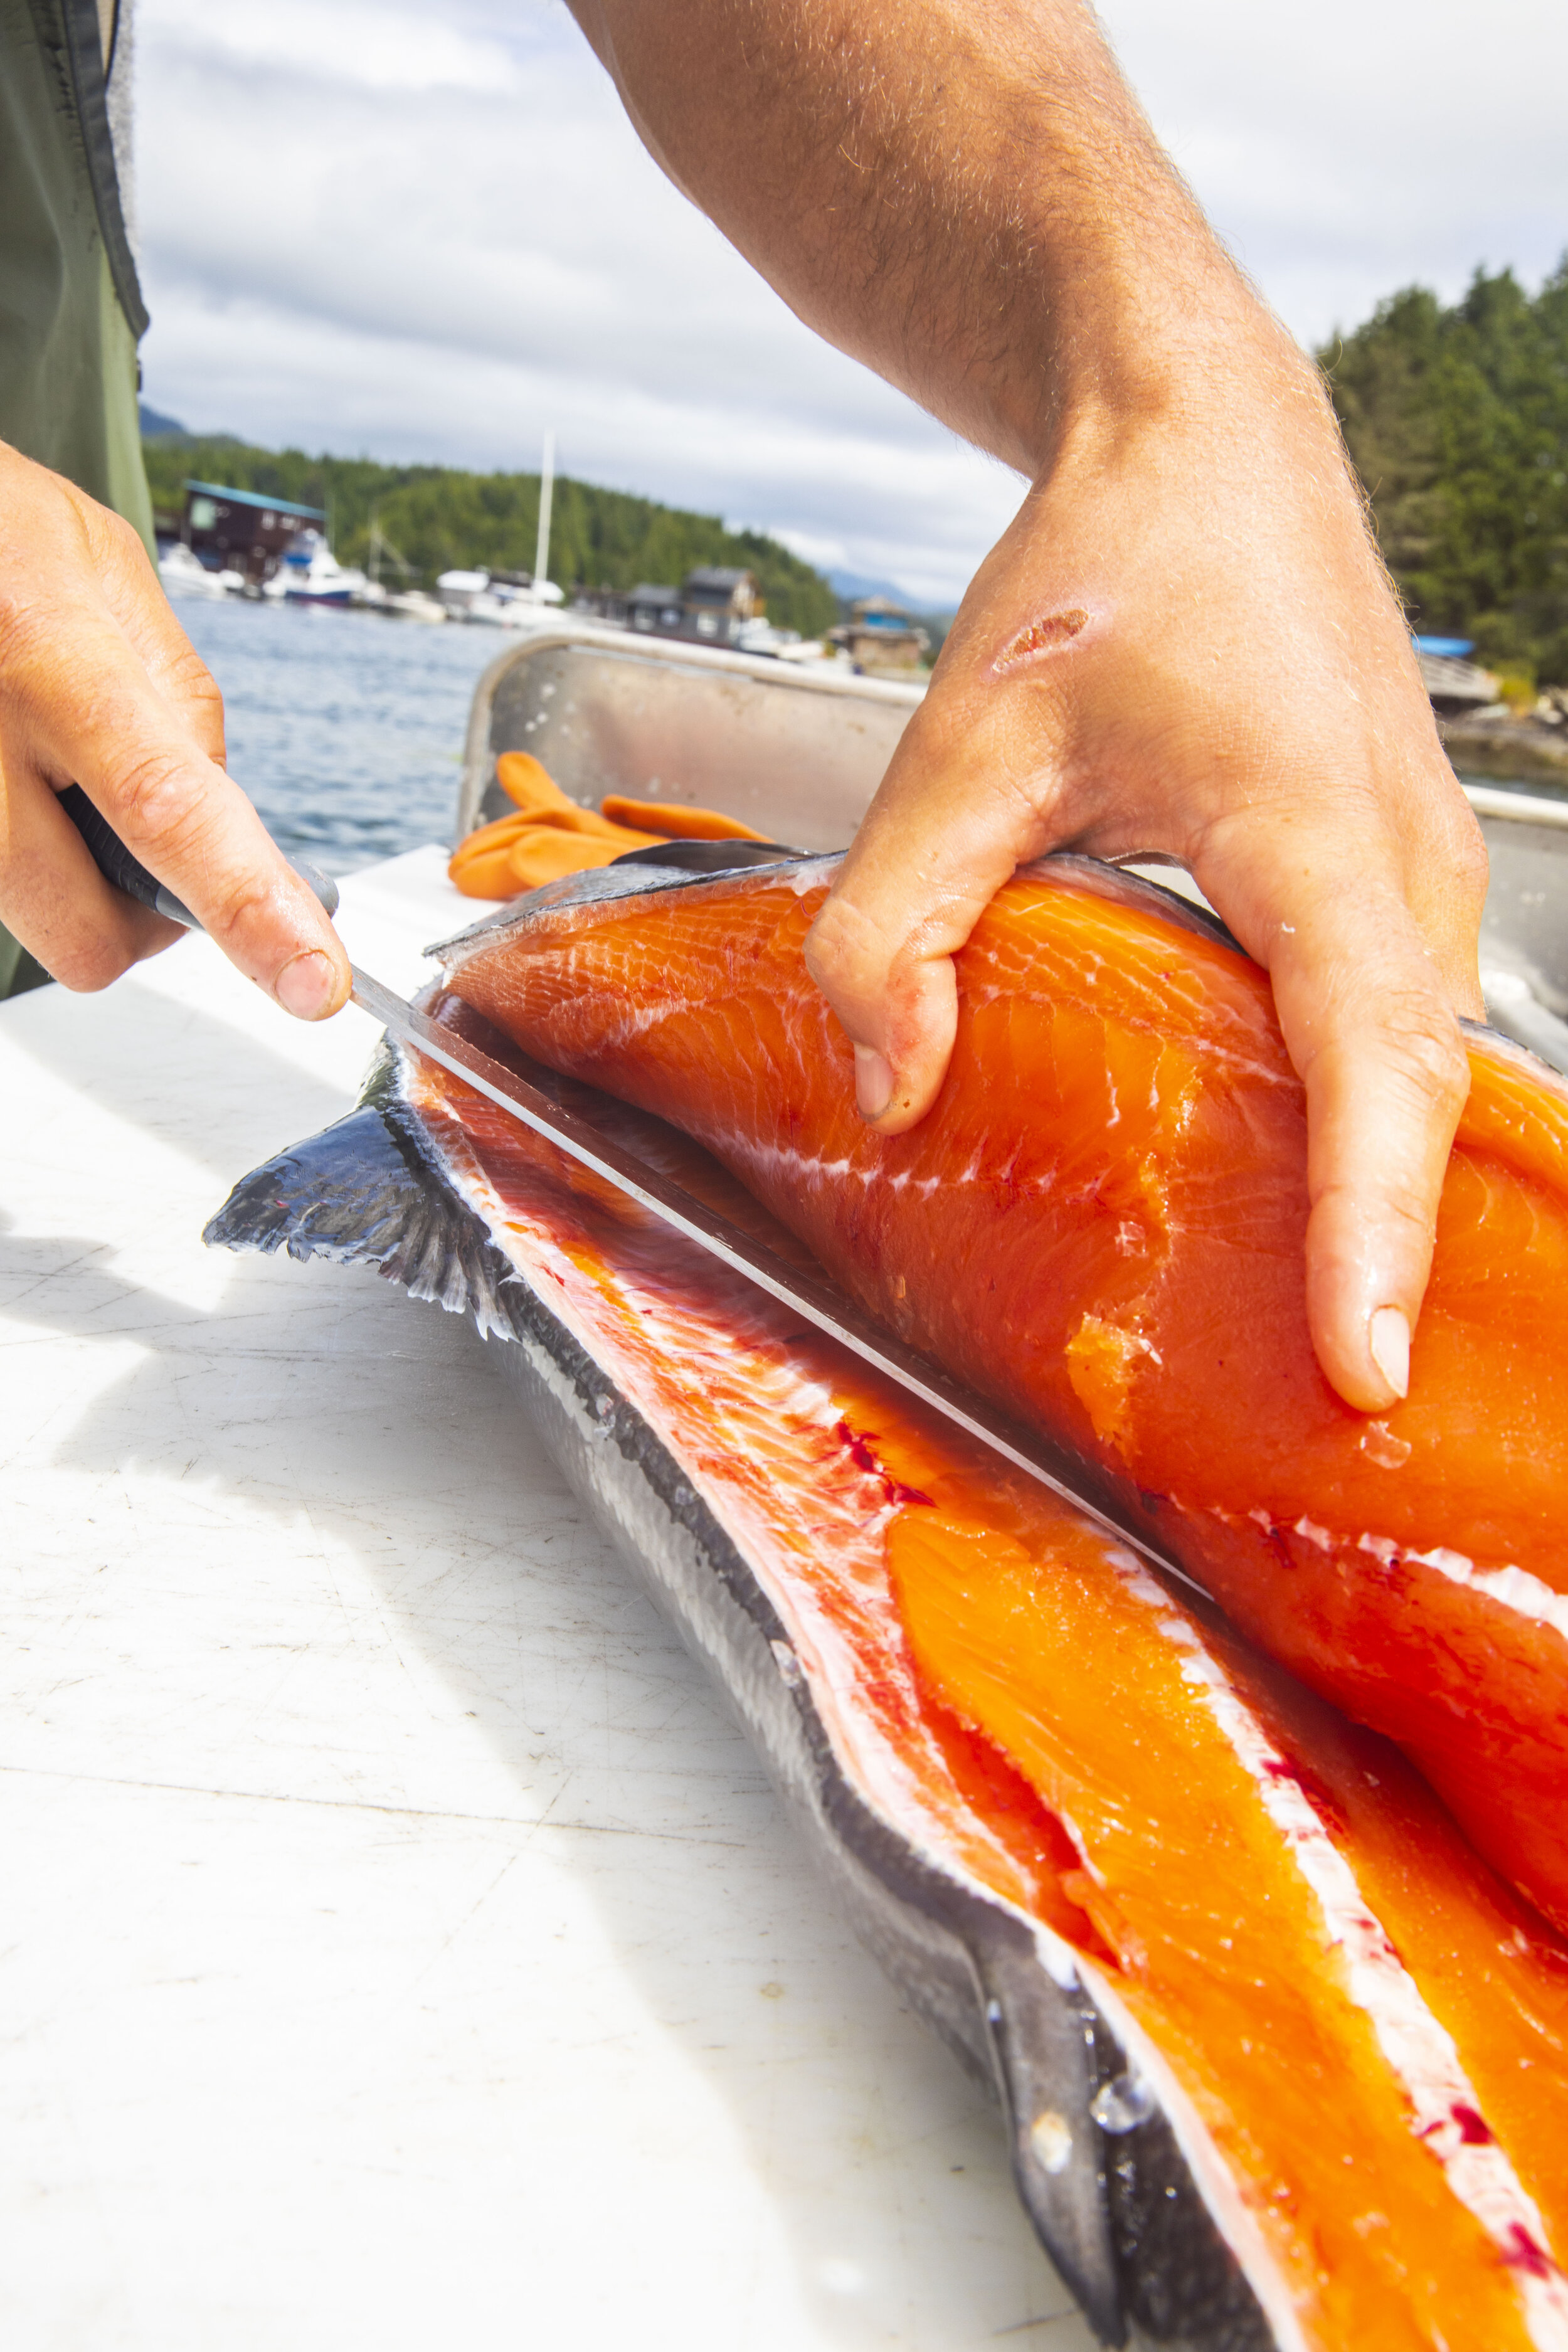  Concerns about fish farms are not limited to First Nations members in the region. Ryan Millar, who captains a whale watching boat, and fishes recreationally fillets a chinook he caught in Clayoquot Sound. "At first glance I see a great alternative t